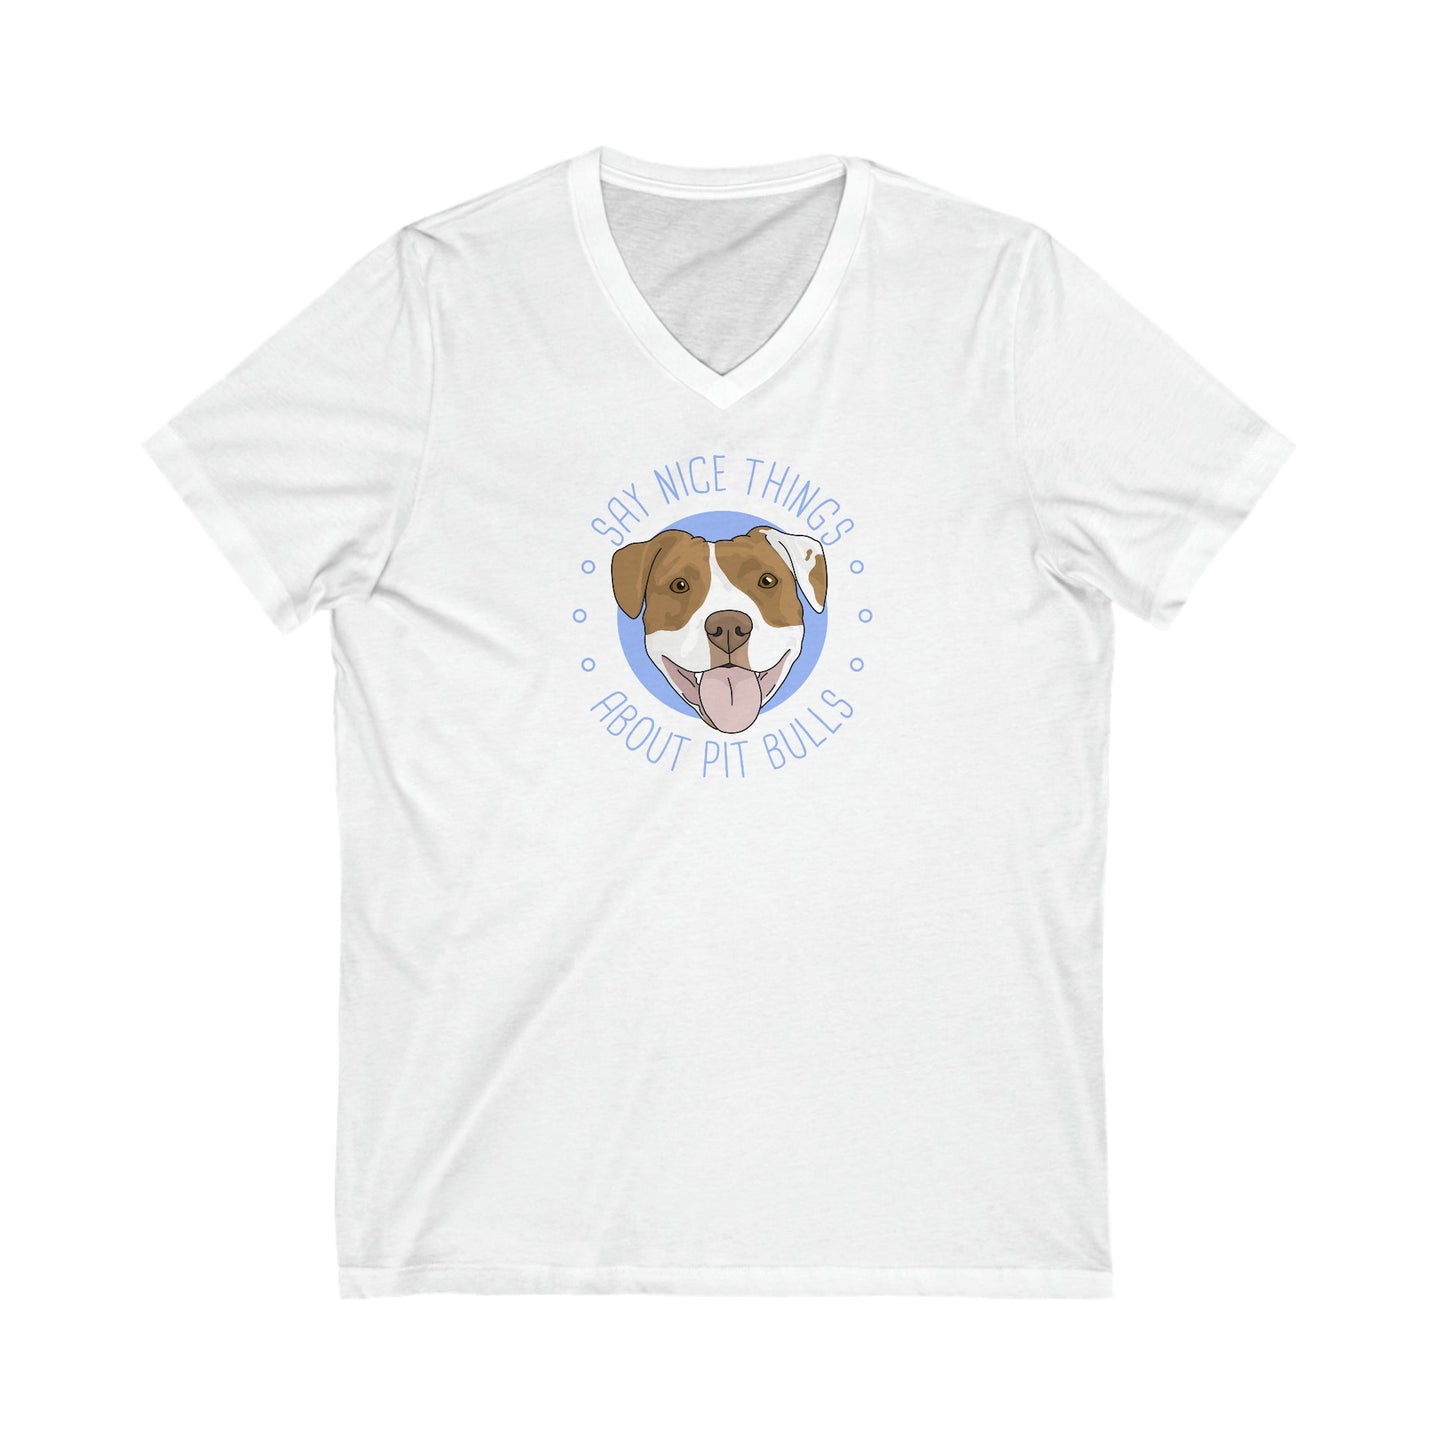 Say Nice Things About Pit Bulls | Unisex V-Neck Tee - Detezi Designs-14157478866560707717